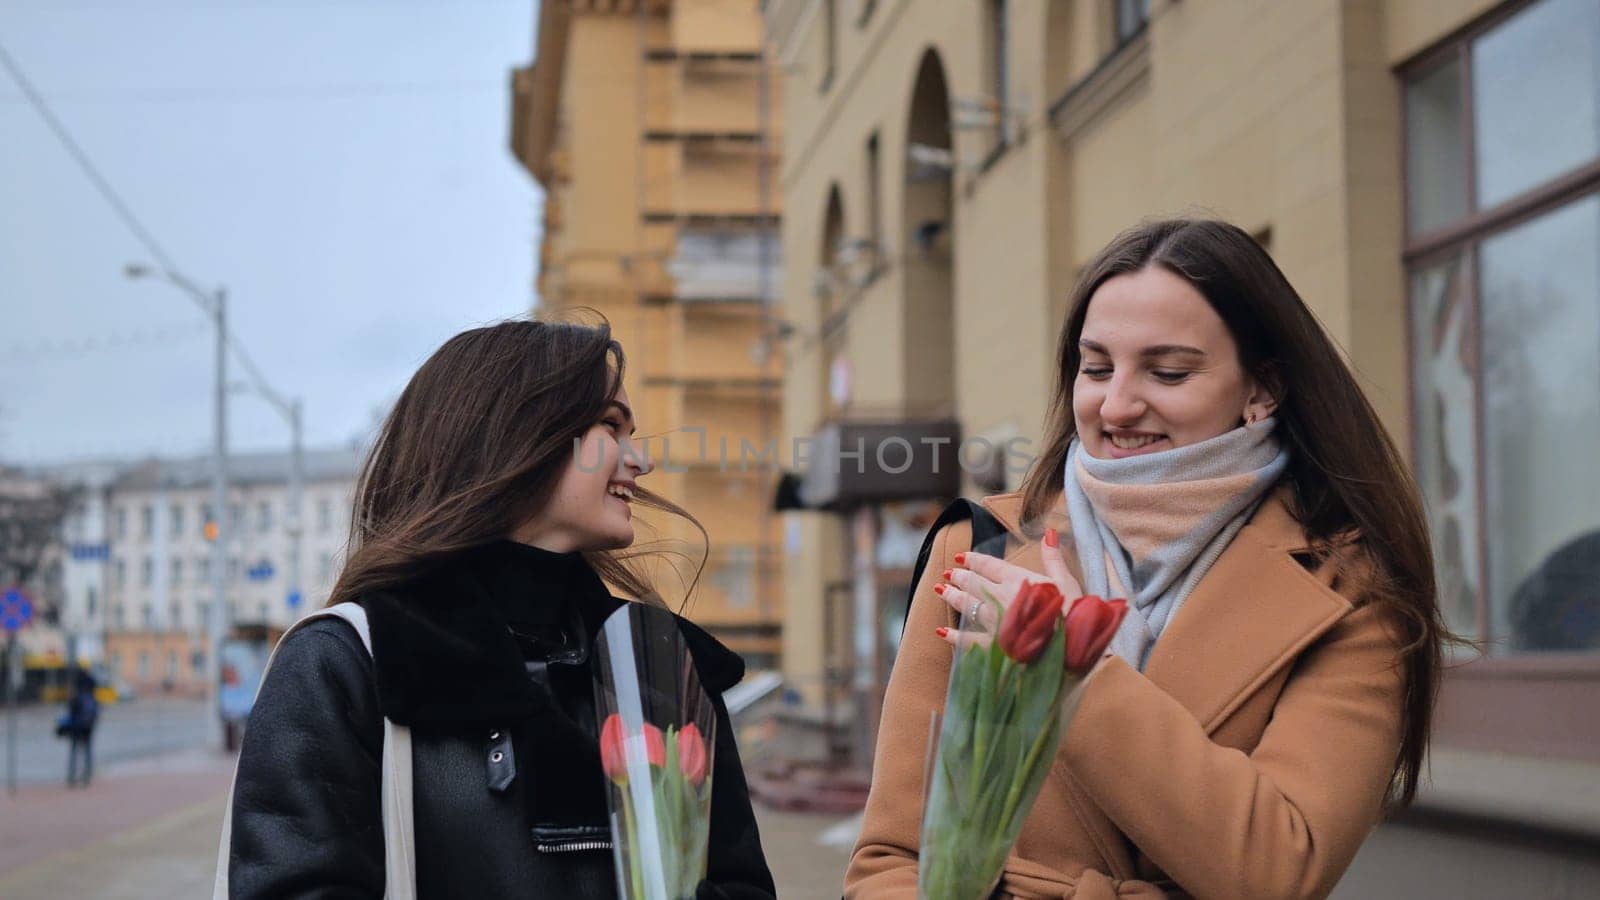 Two young girls, friends with flowers in their hands, walk along a city street by DovidPro